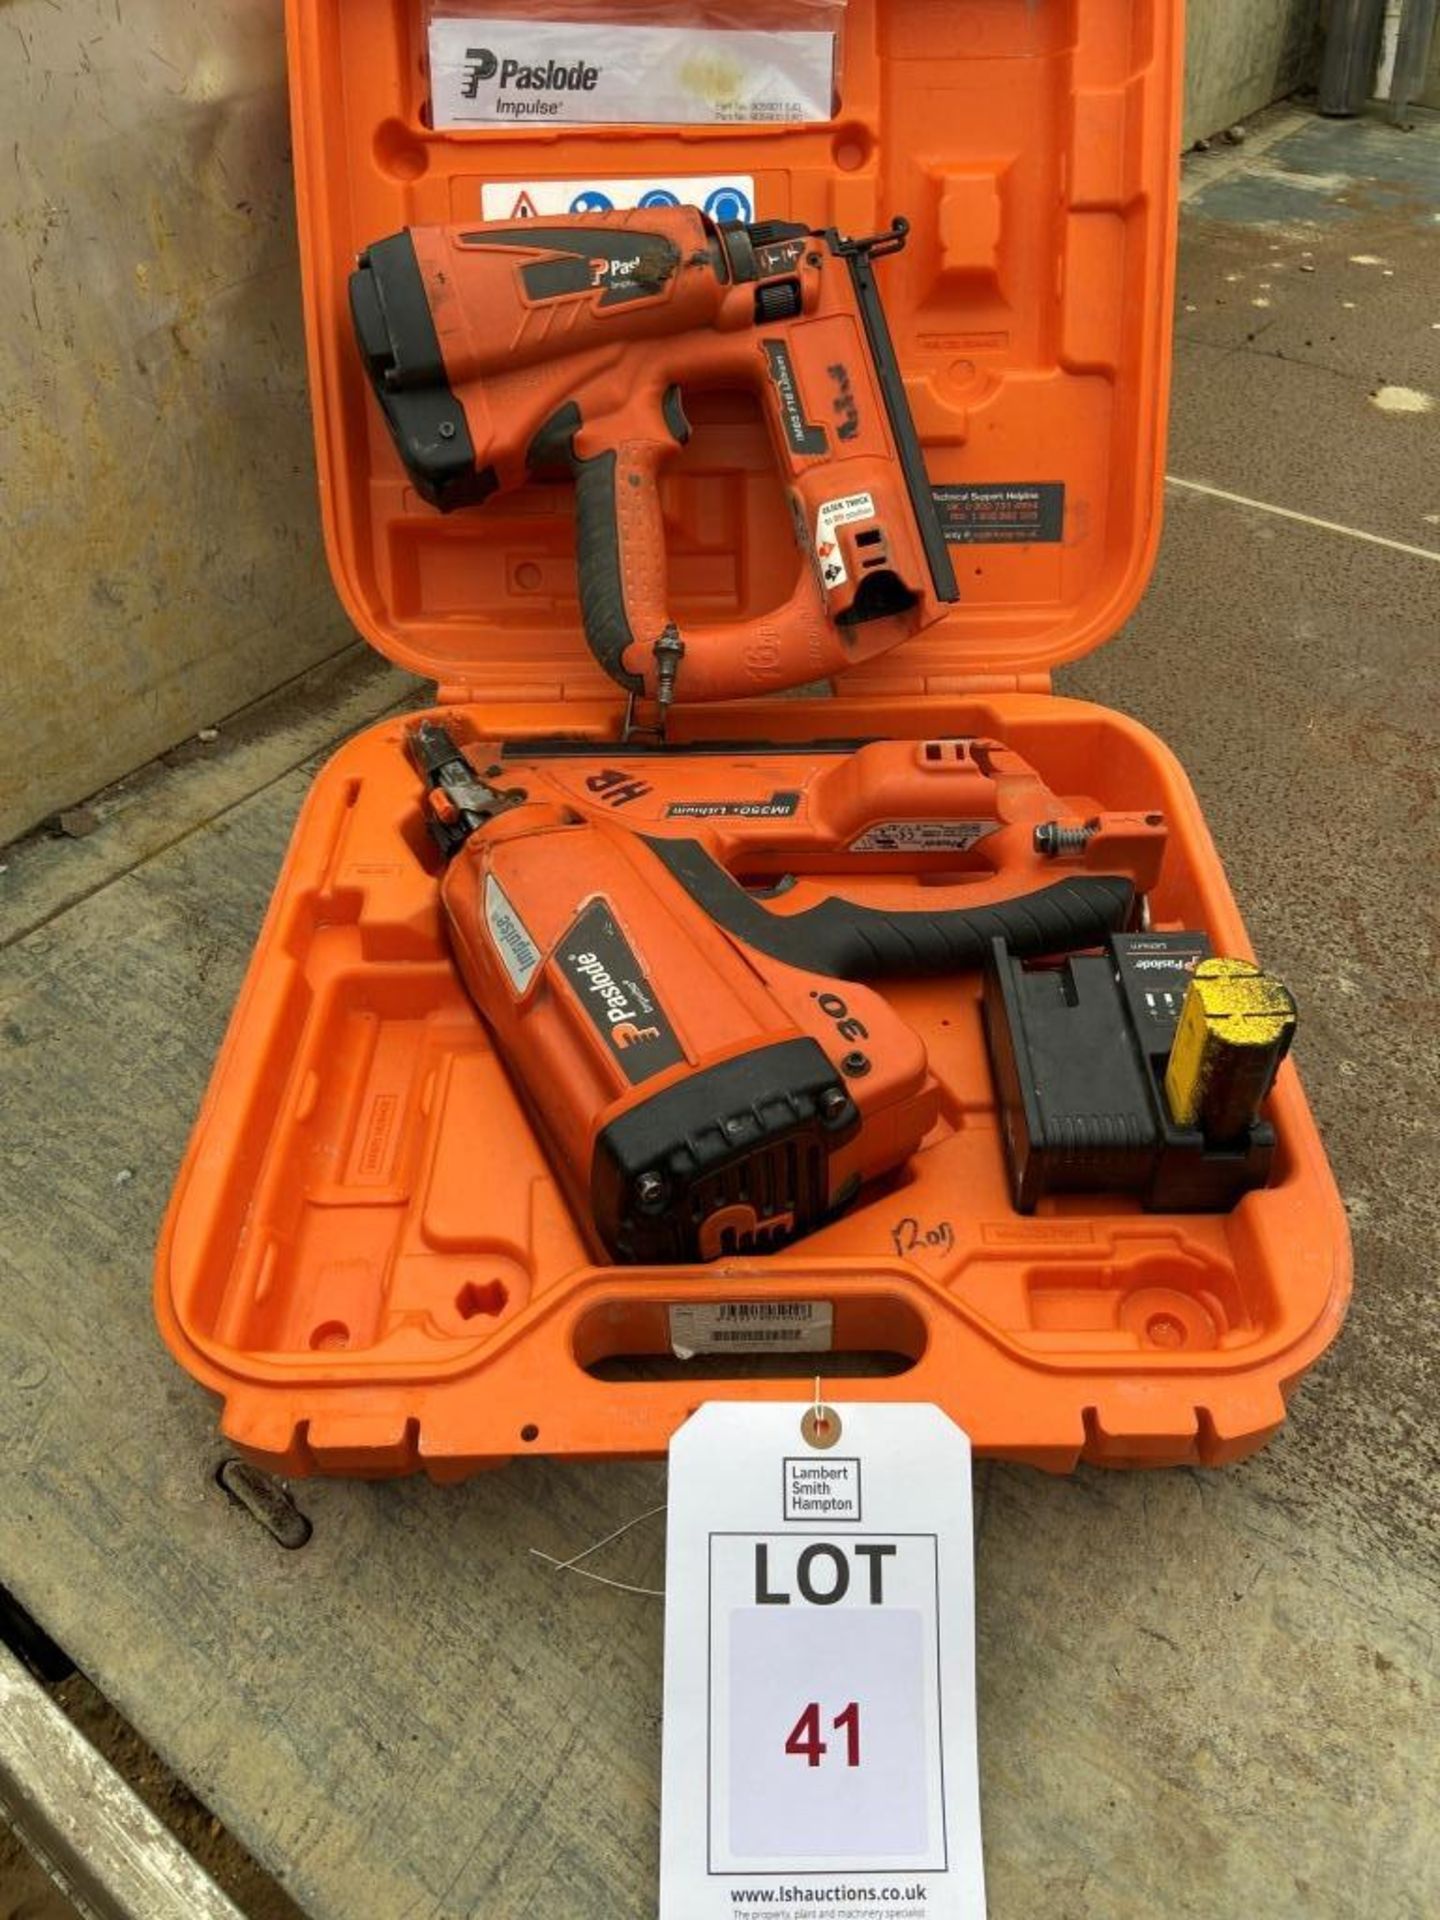 Two Paslode Impulse IM350+ nail guns, one battery and case